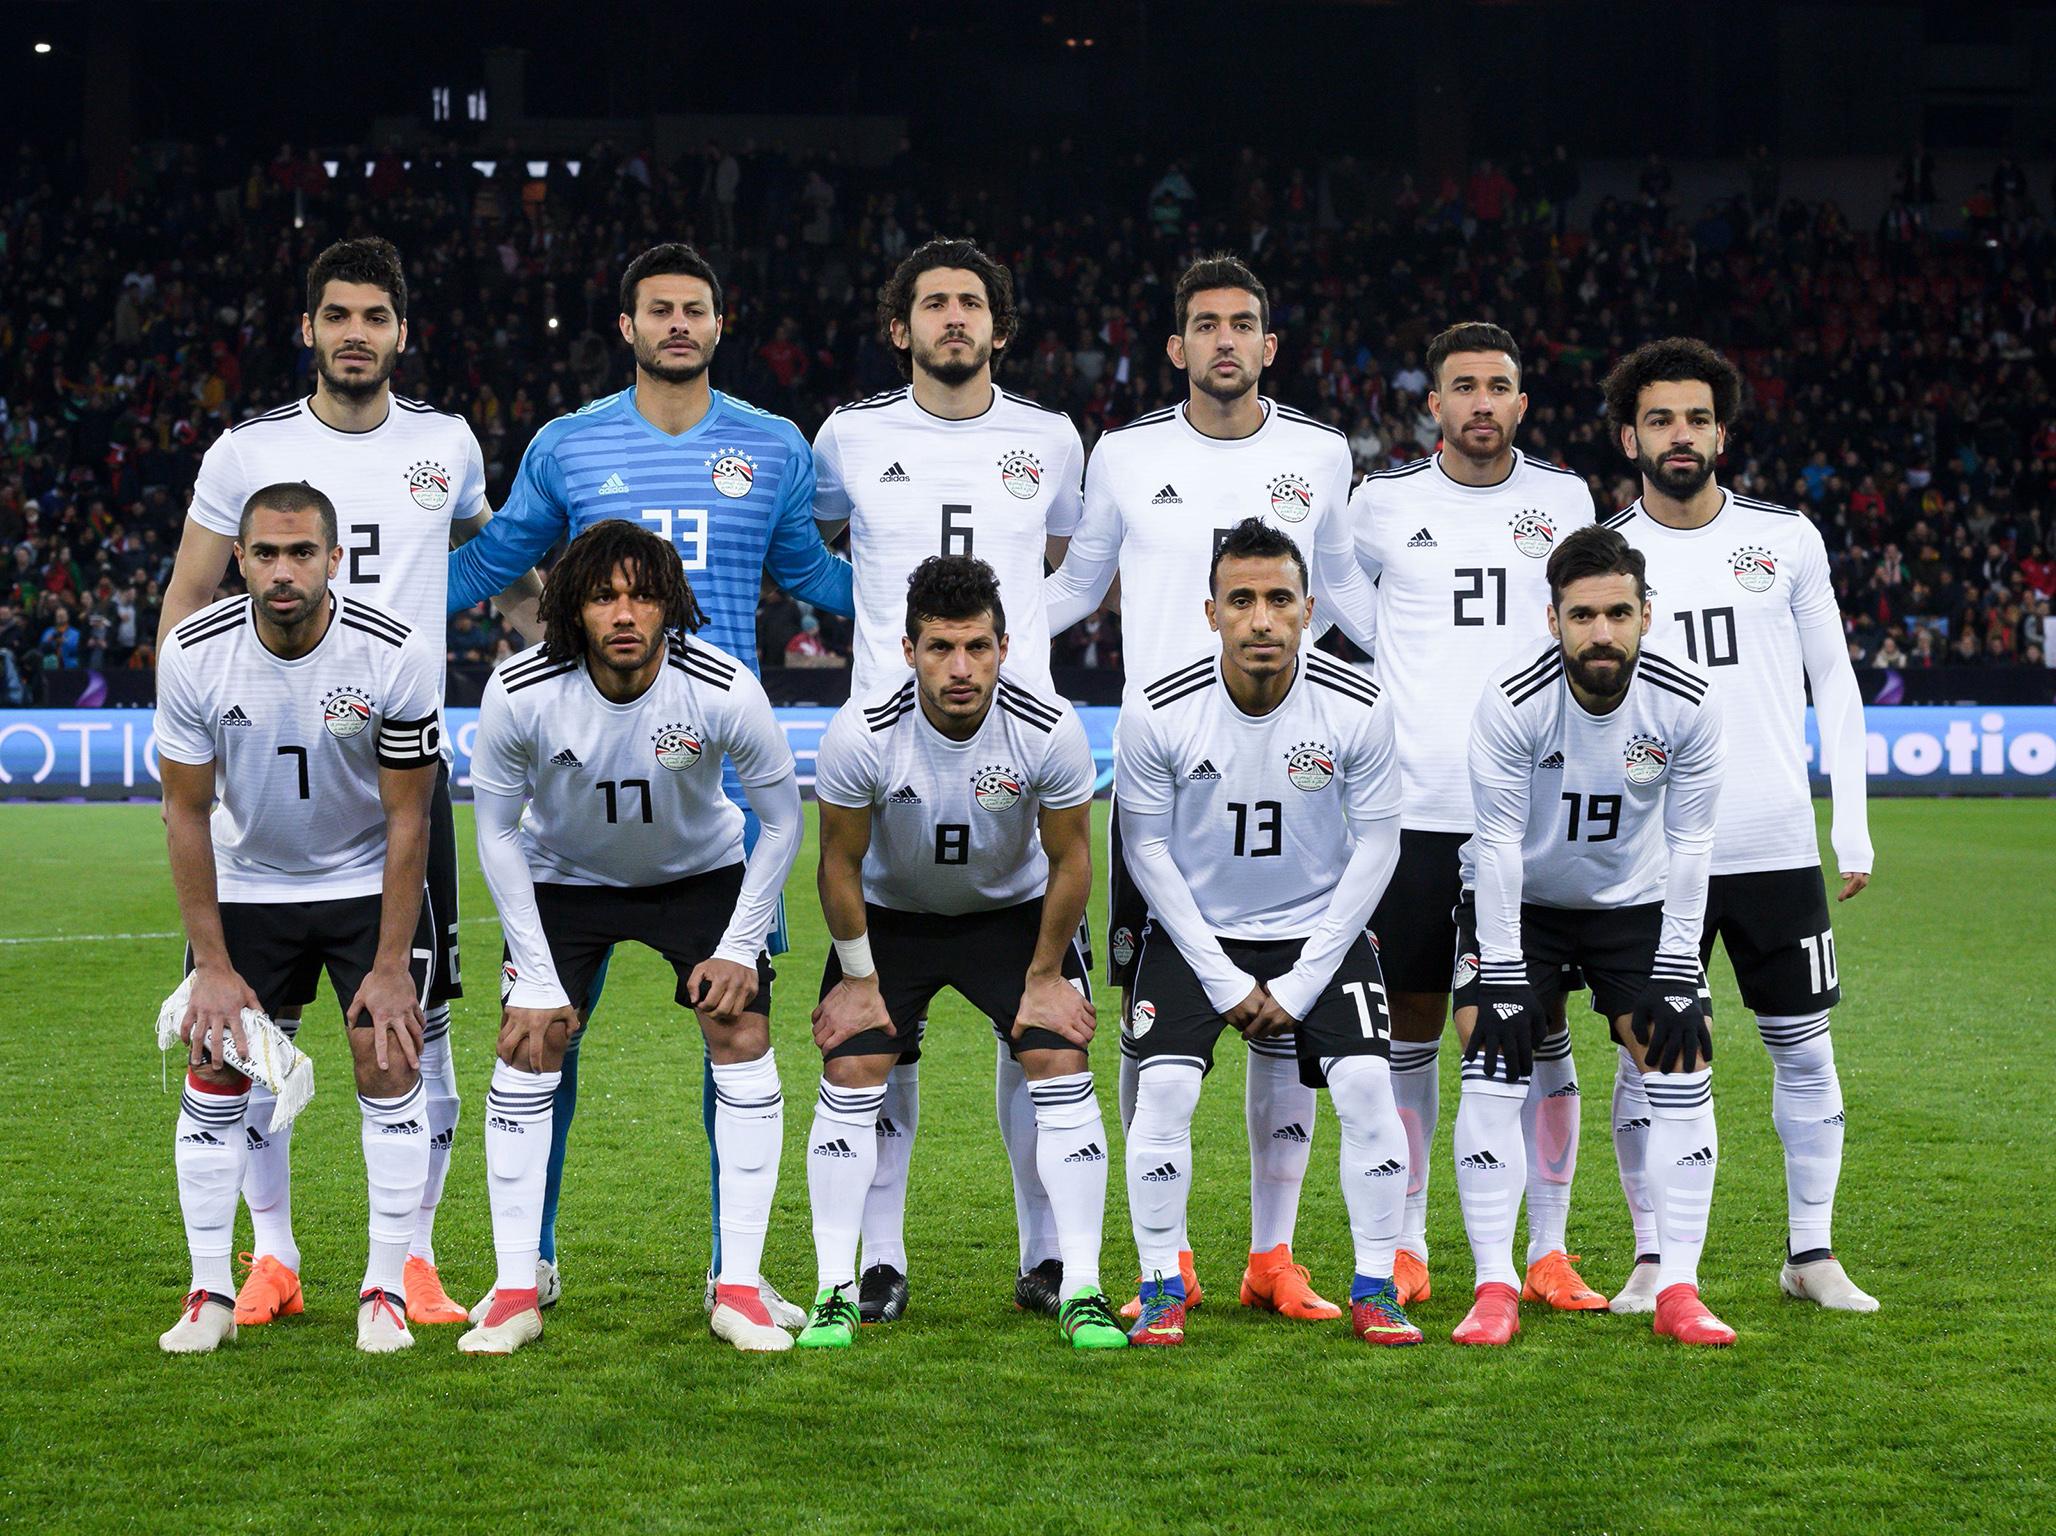 Egypt World Cup Squad Guide Full Fixtures Group Ones To Watch Odds And More The Independent